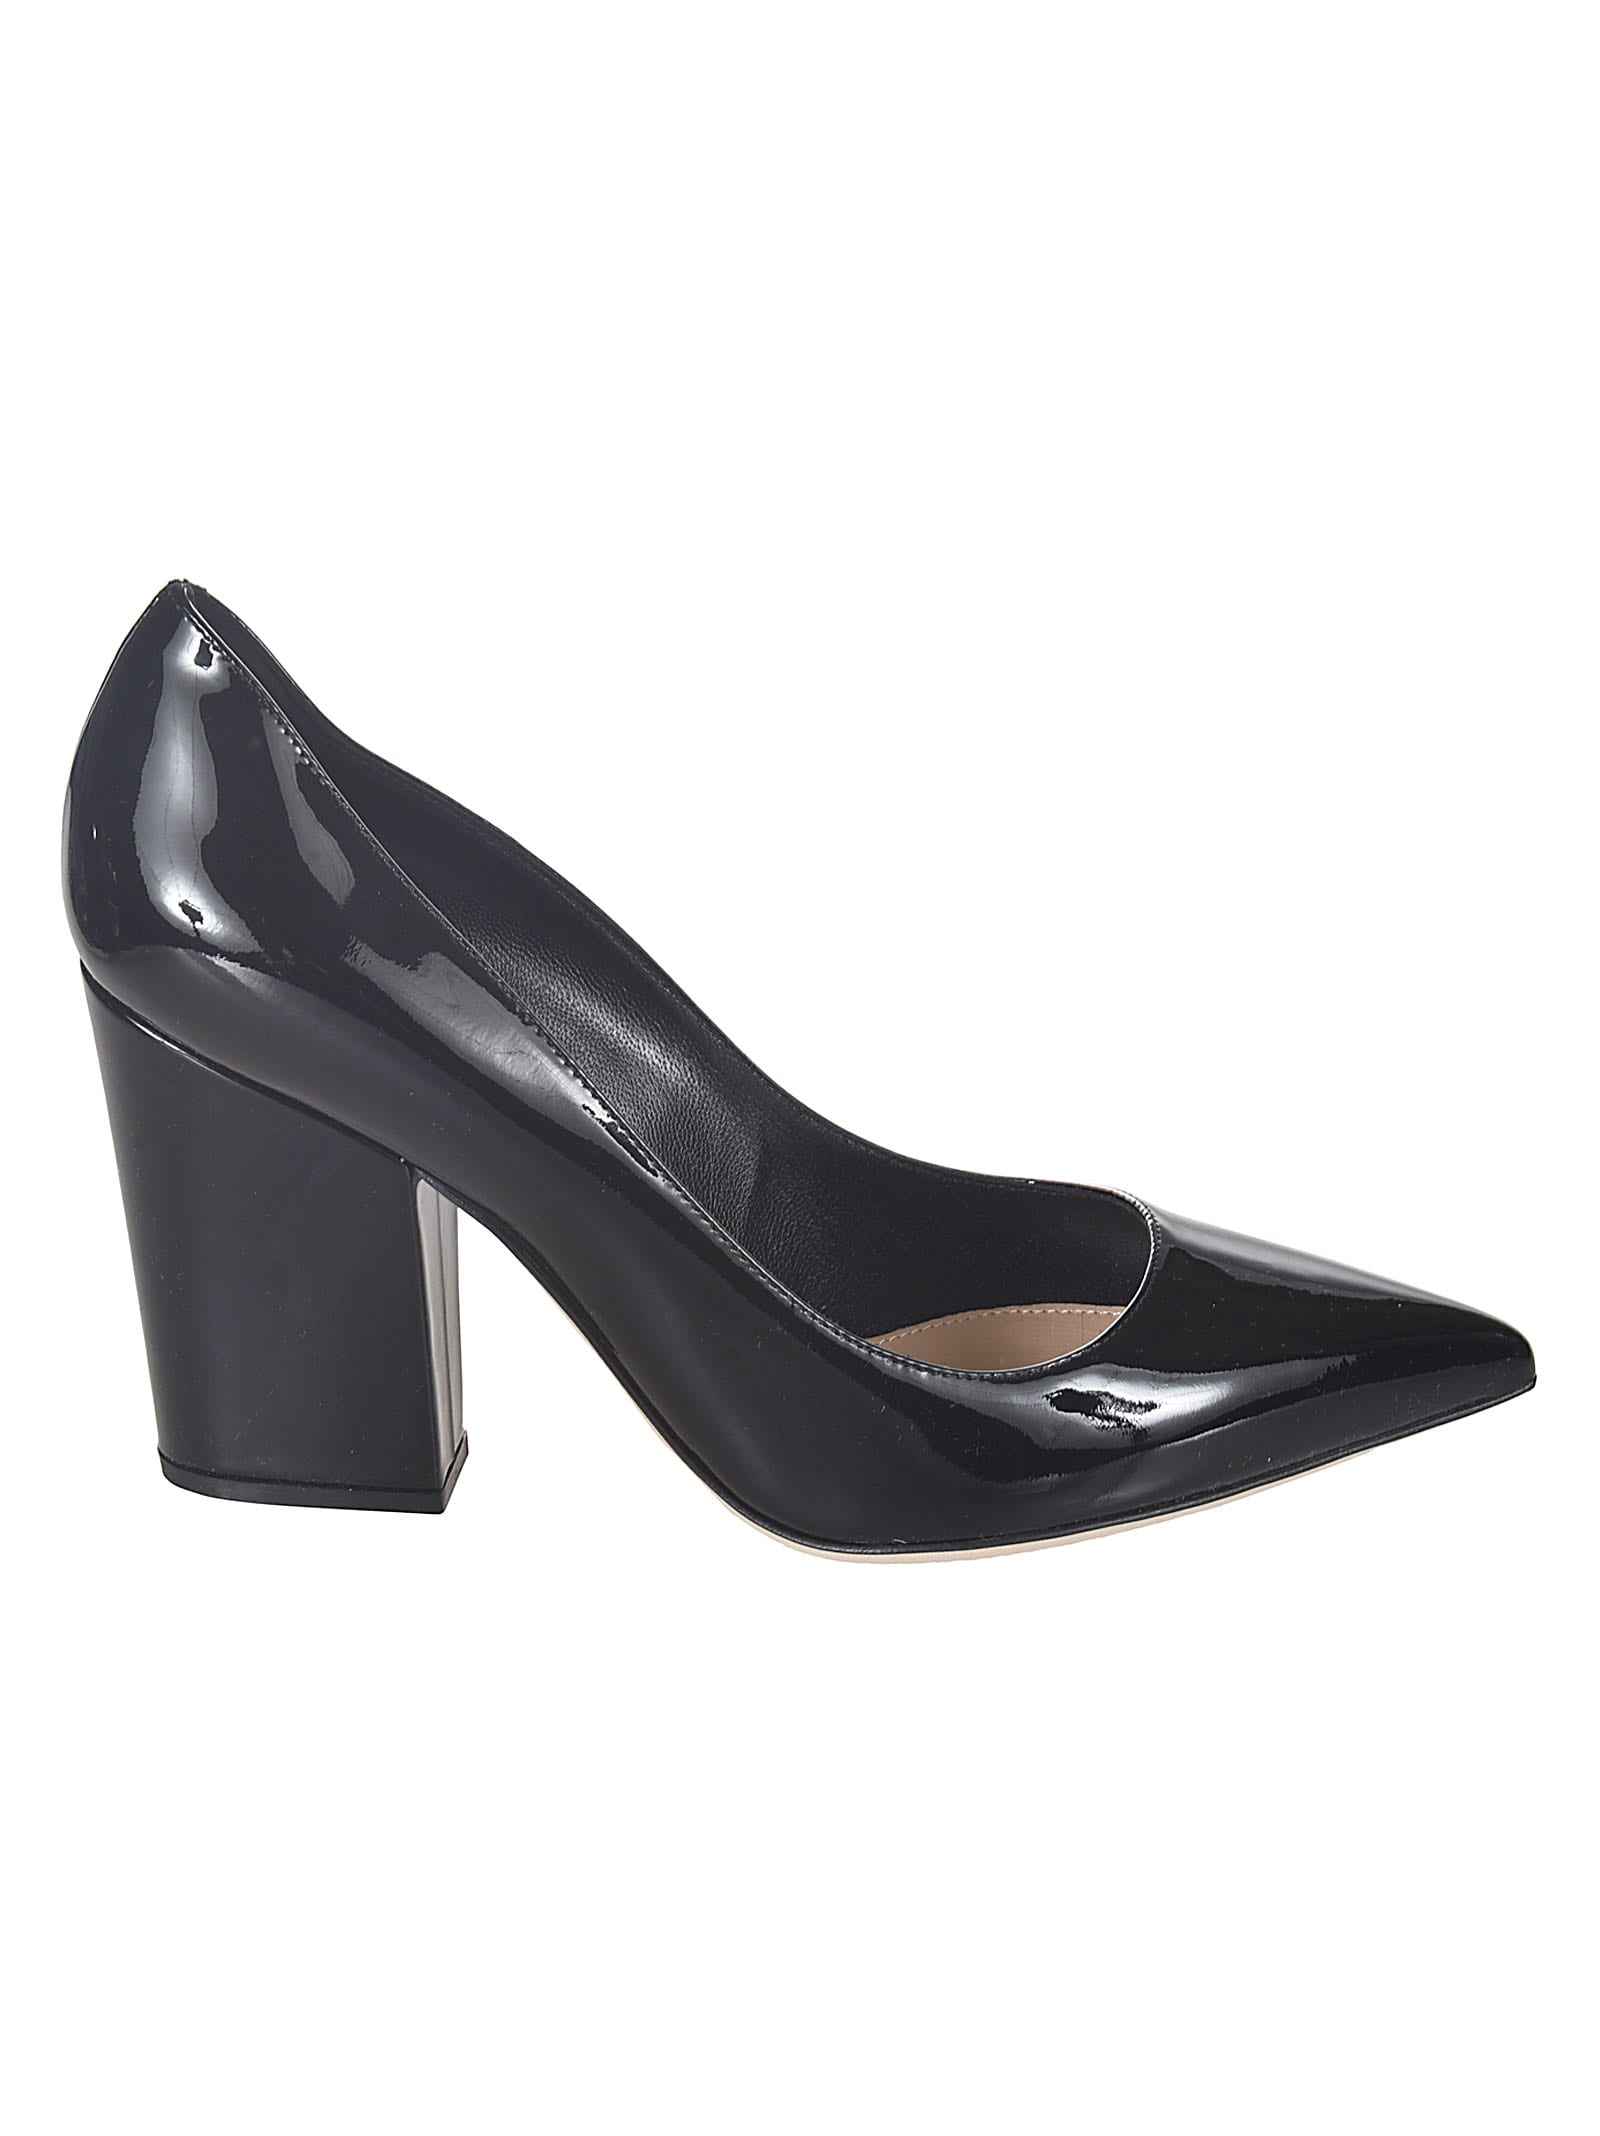 Buy Sergio Rossi Block Heel Pumps online, shop Sergio Rossi shoes with free shipping